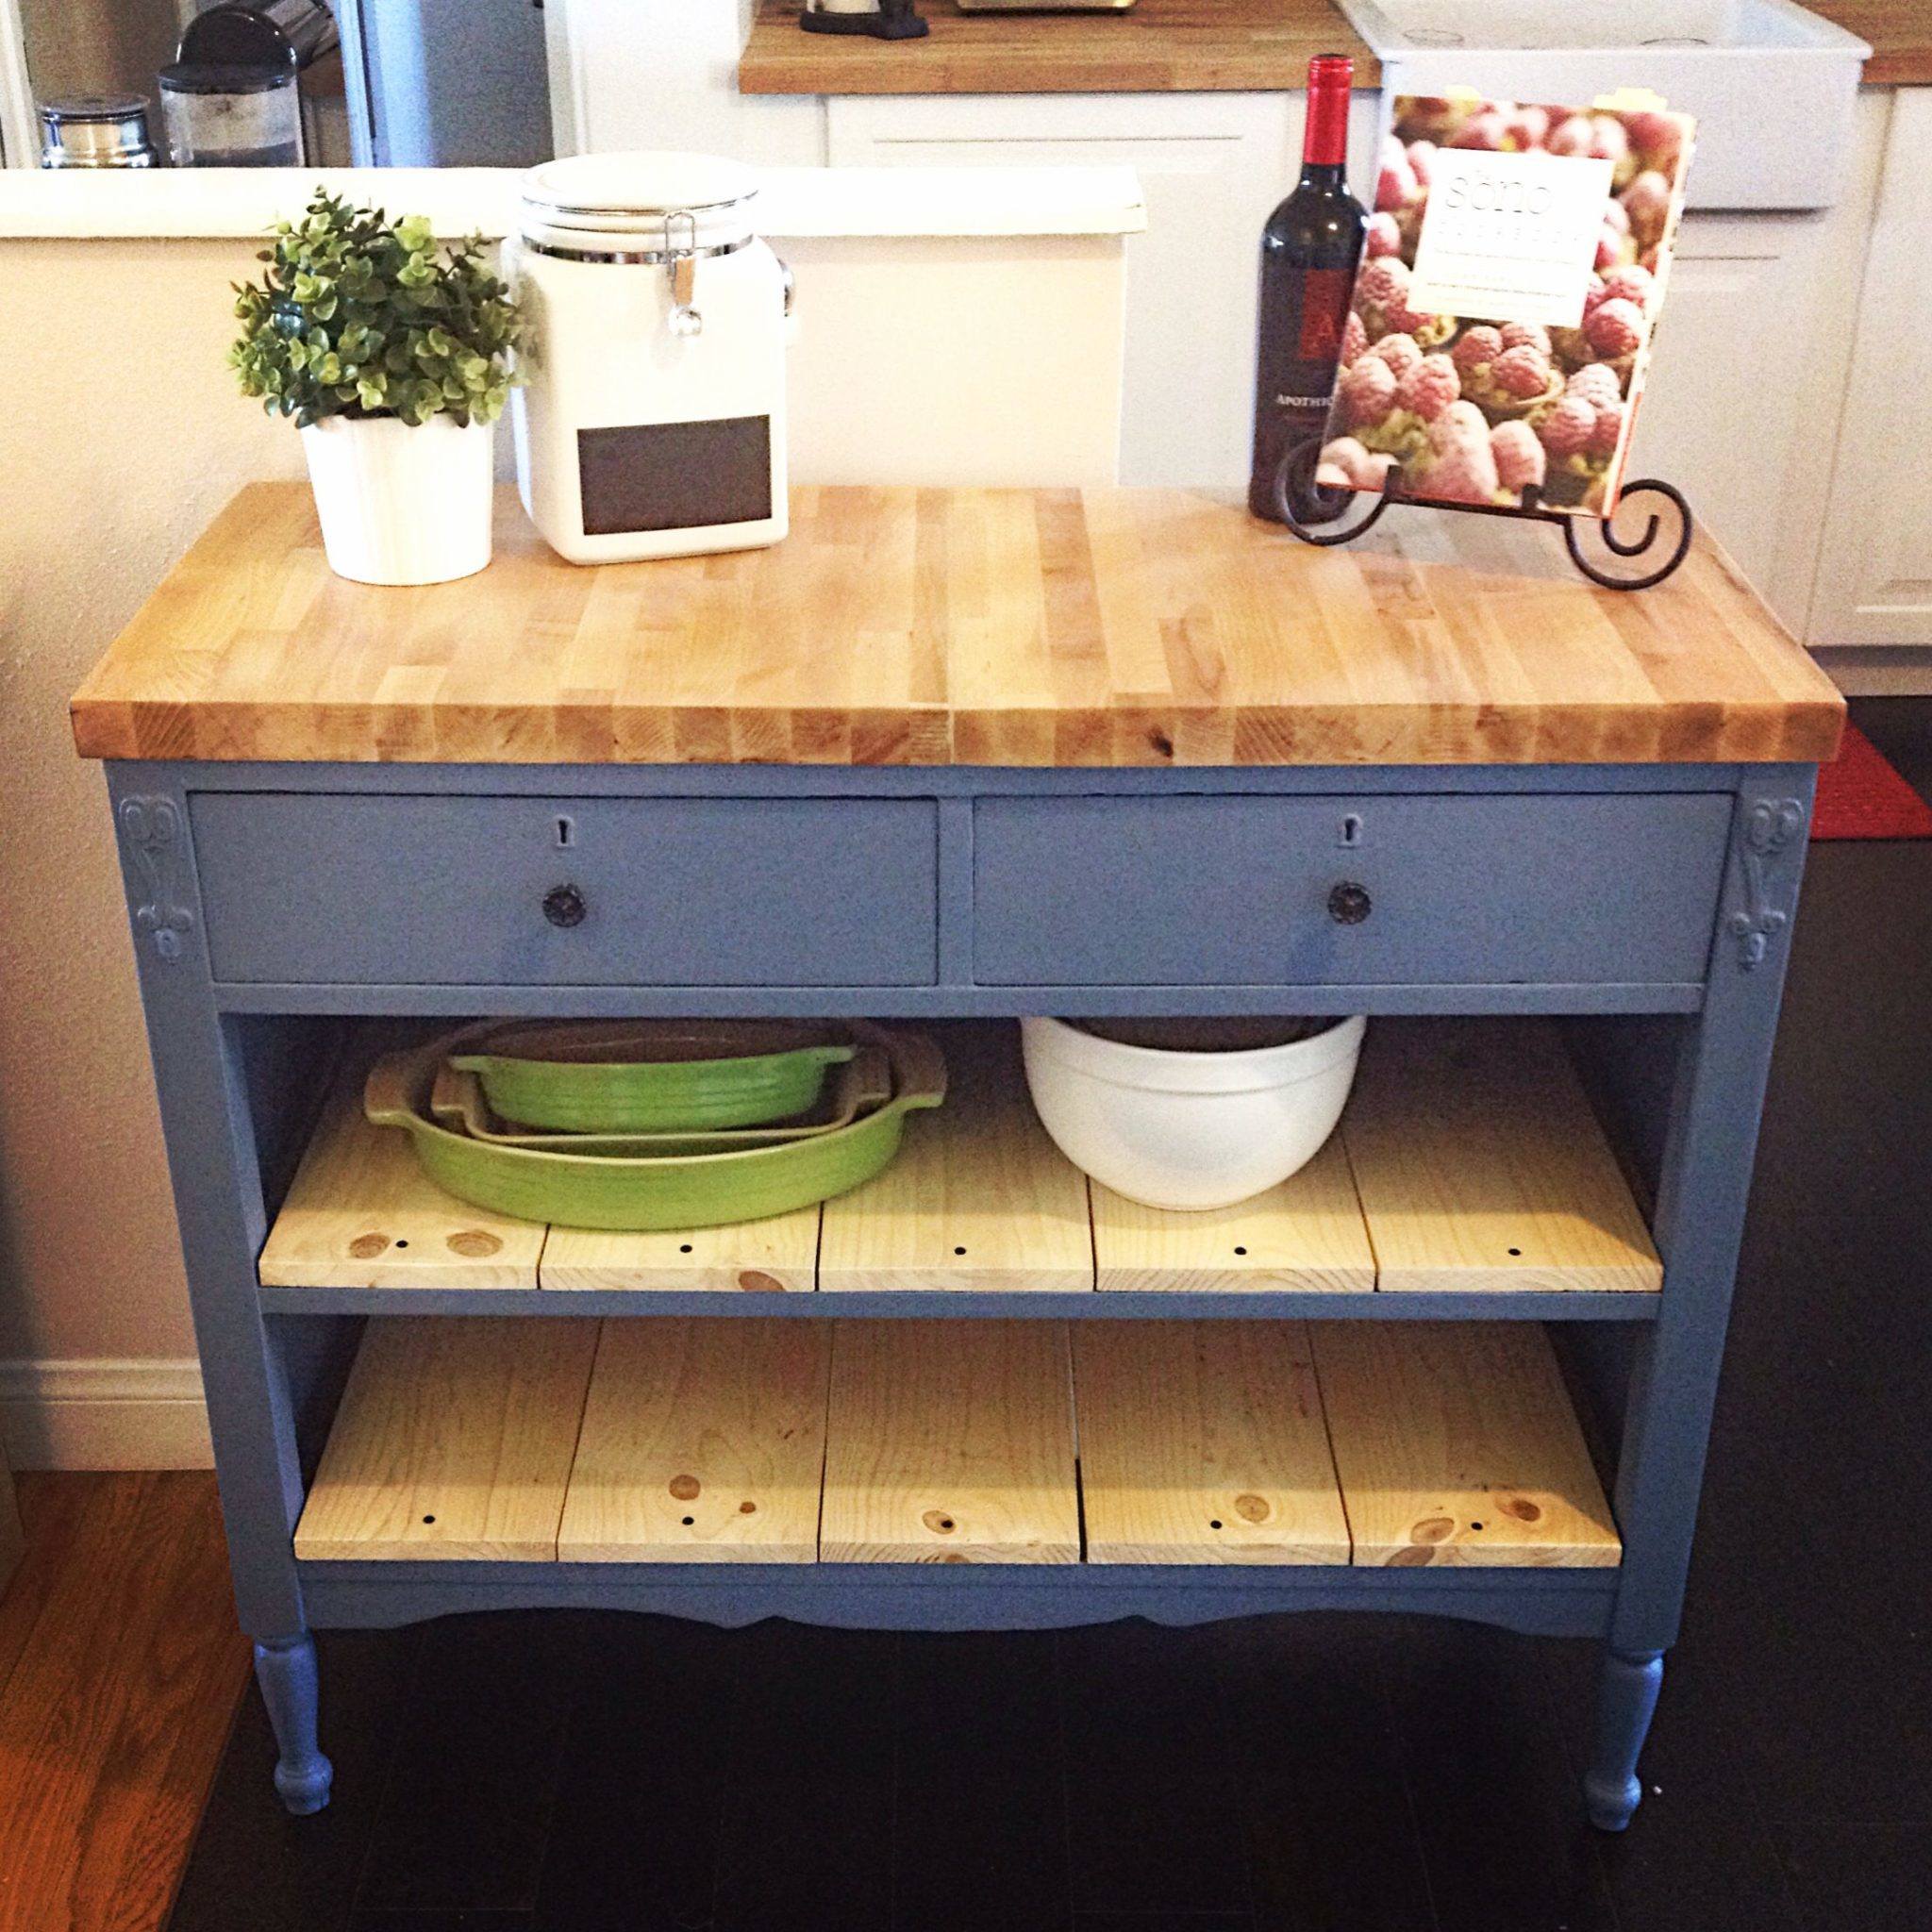 Upcycle An Old Dresser Into A Kitchen Island For Budget Beauty